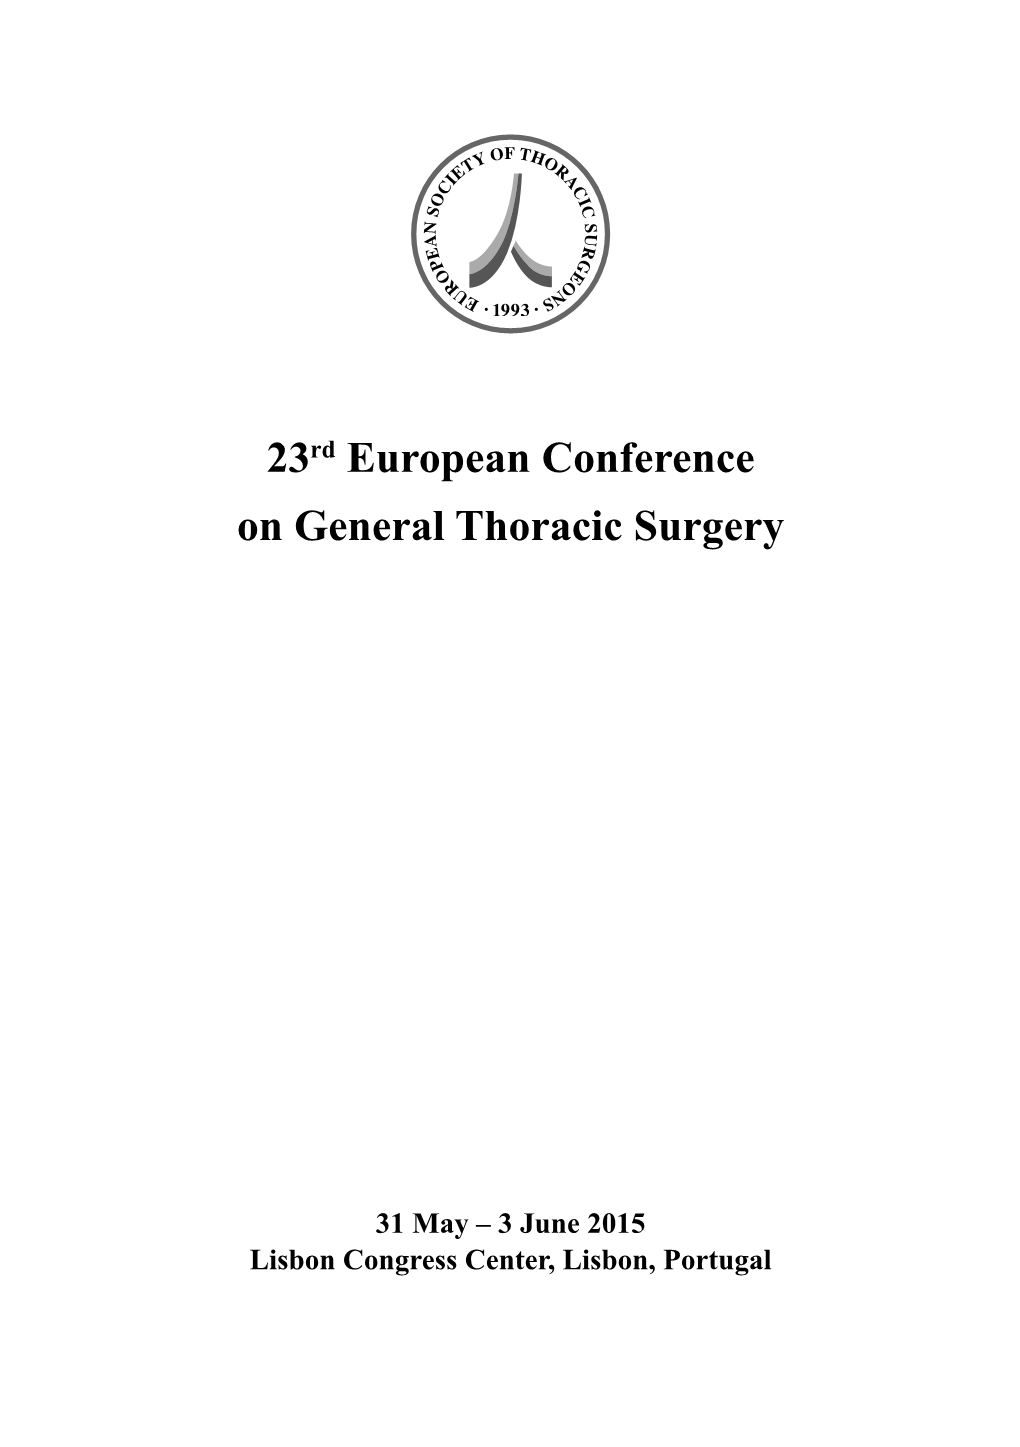 23Rd European Conference on General Thoracic Surgery